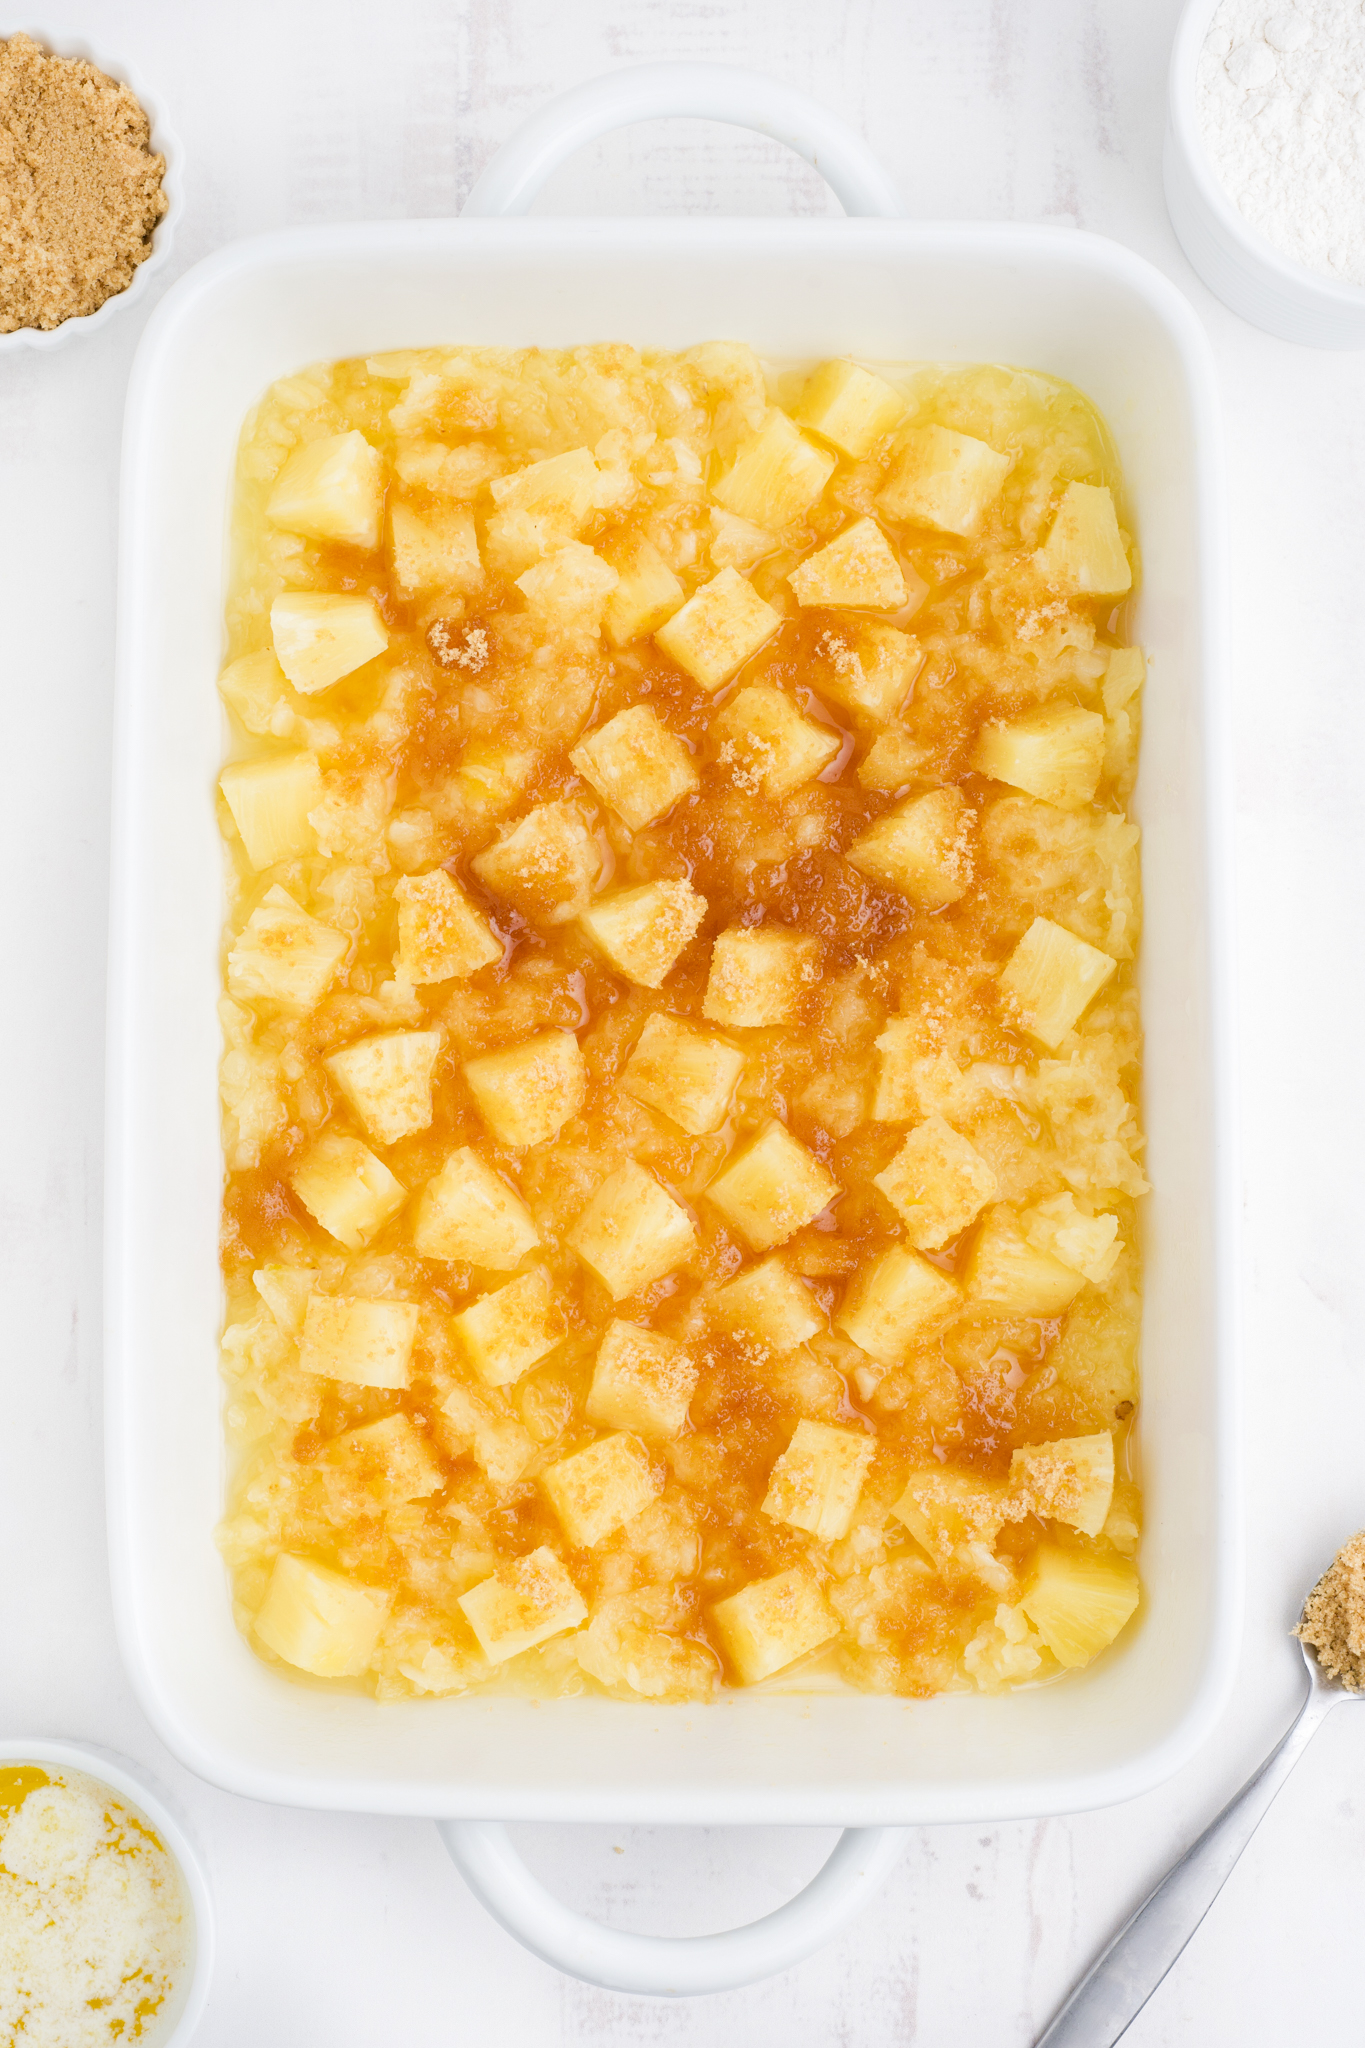 A photo of the bottom layer of pineapple dump cake - canned pineapple, brown sugar and cinnamon